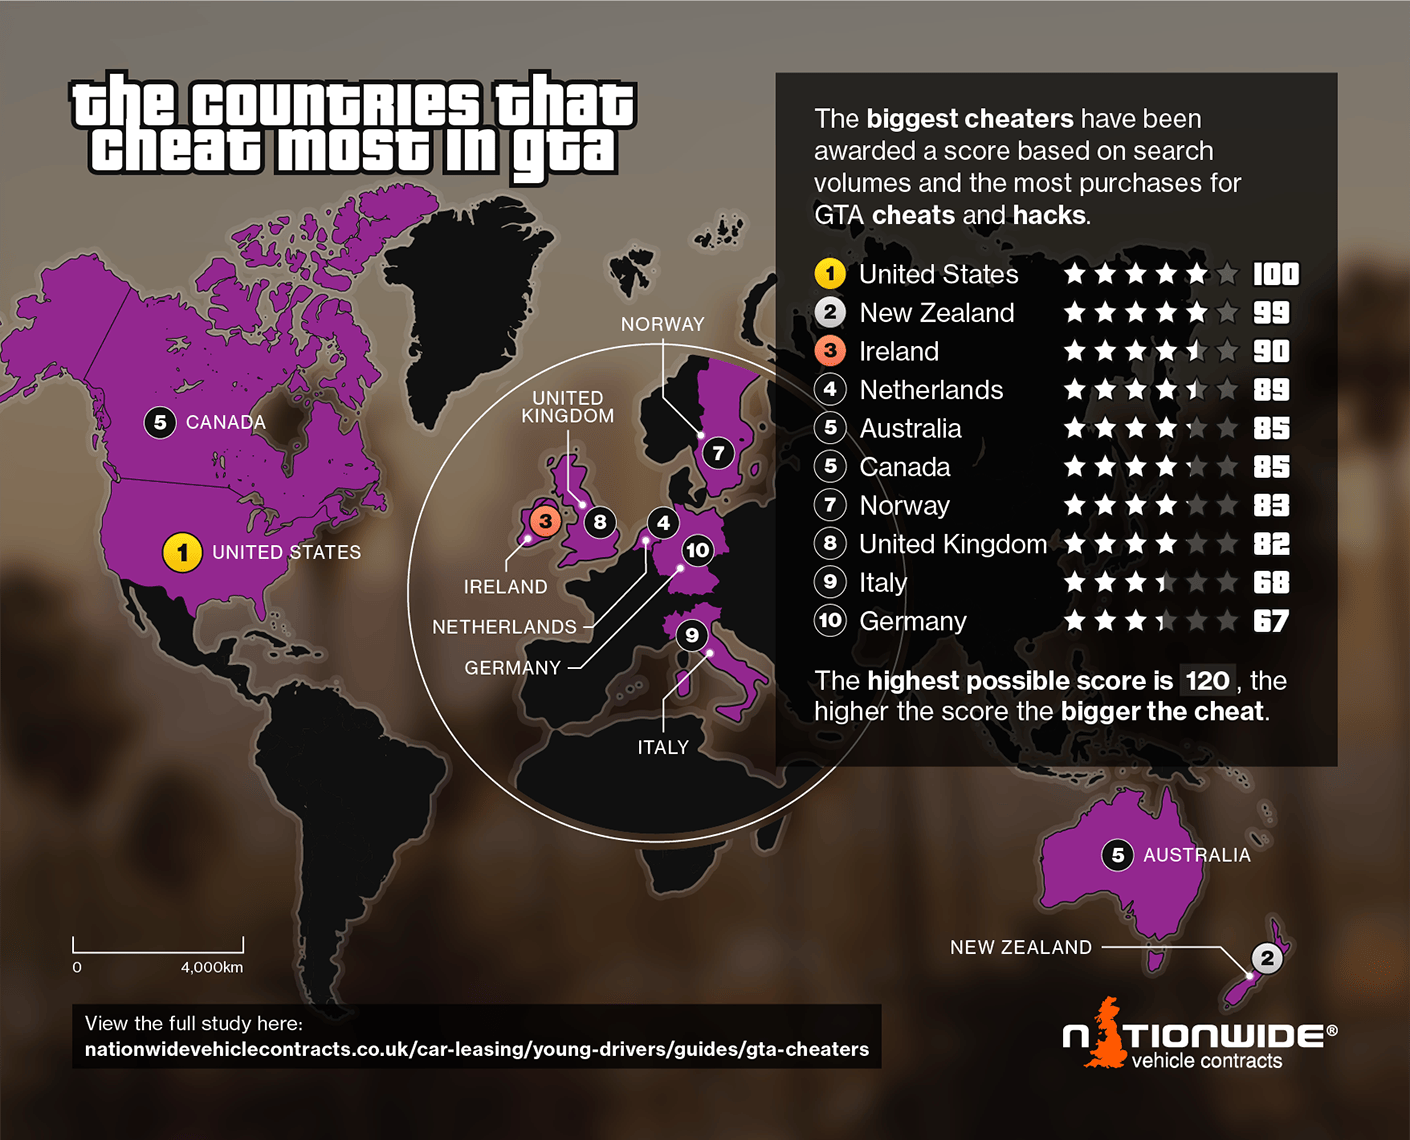 The Countries that cheat most in GTA table